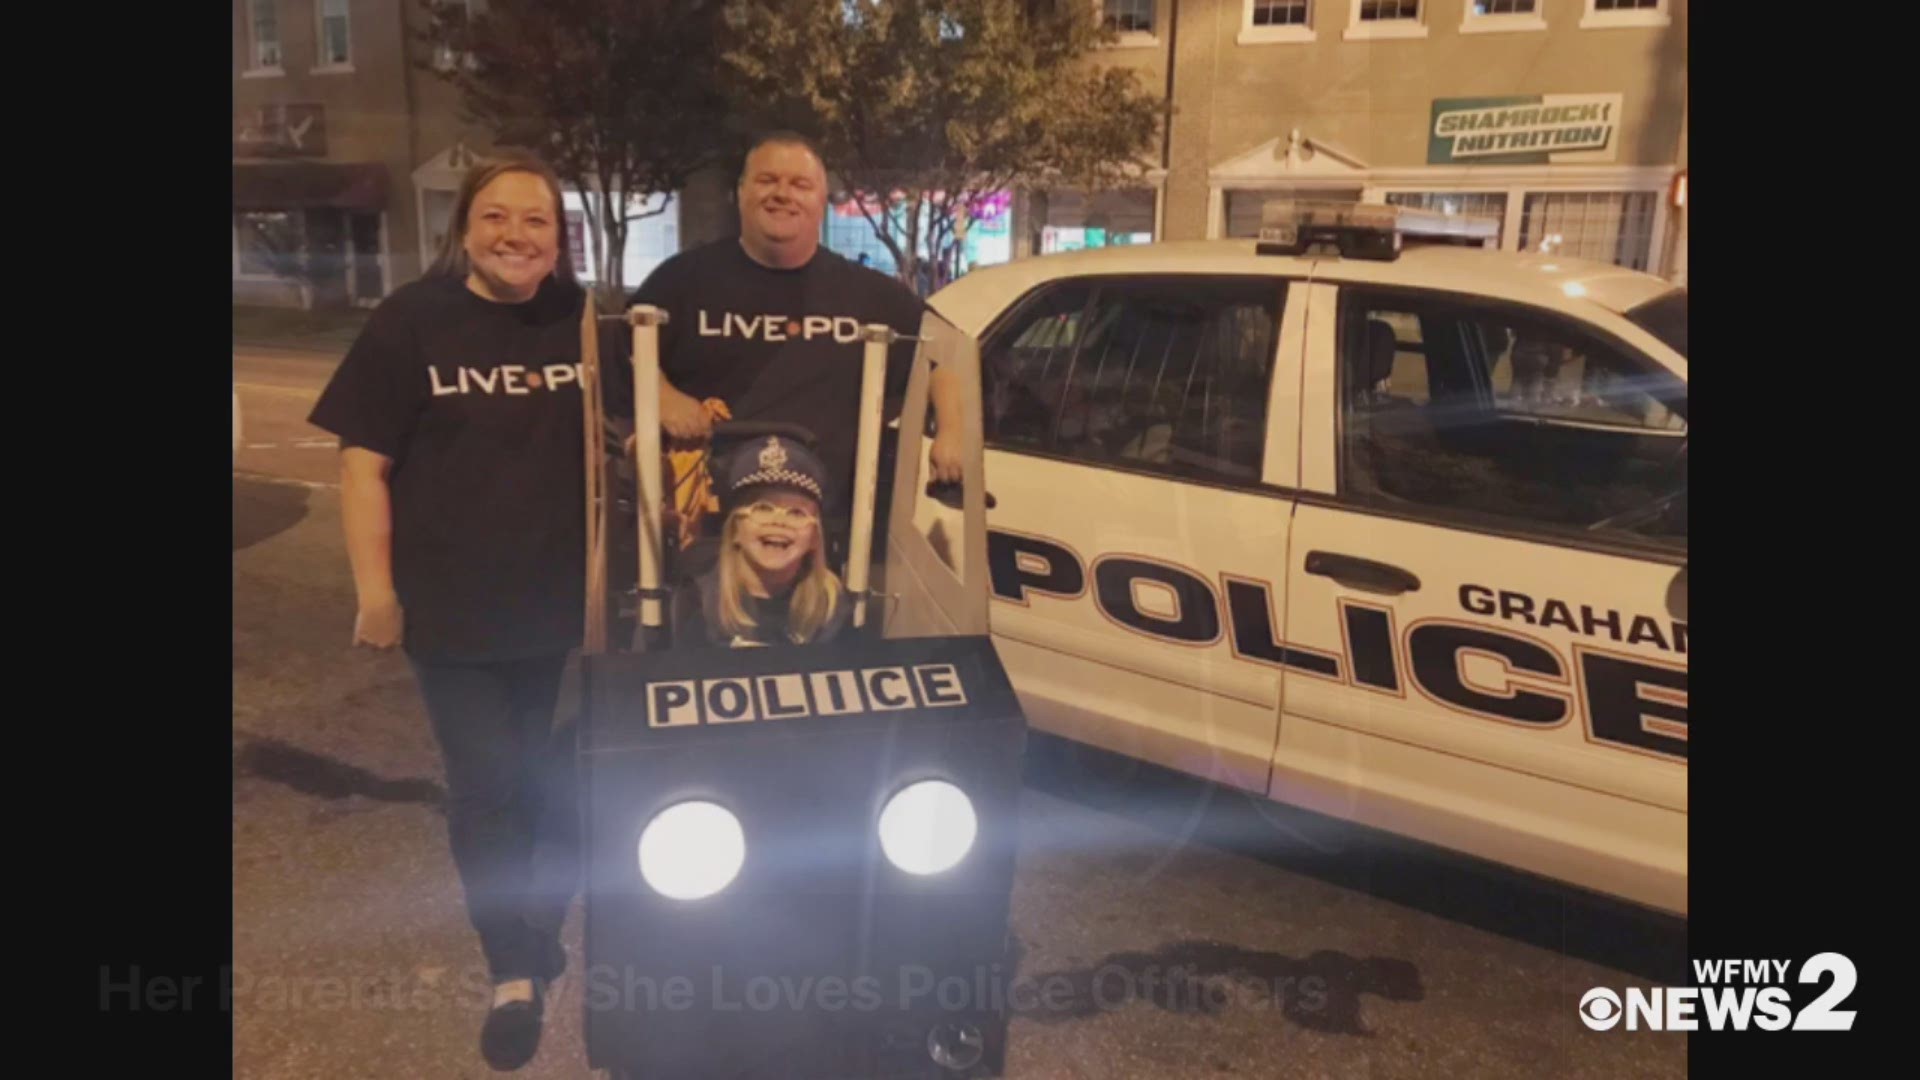 7-year-old Emma had an epic Halloween costume! Her parents say she loves police officers, so they turned her wheelchair into a patrol car.